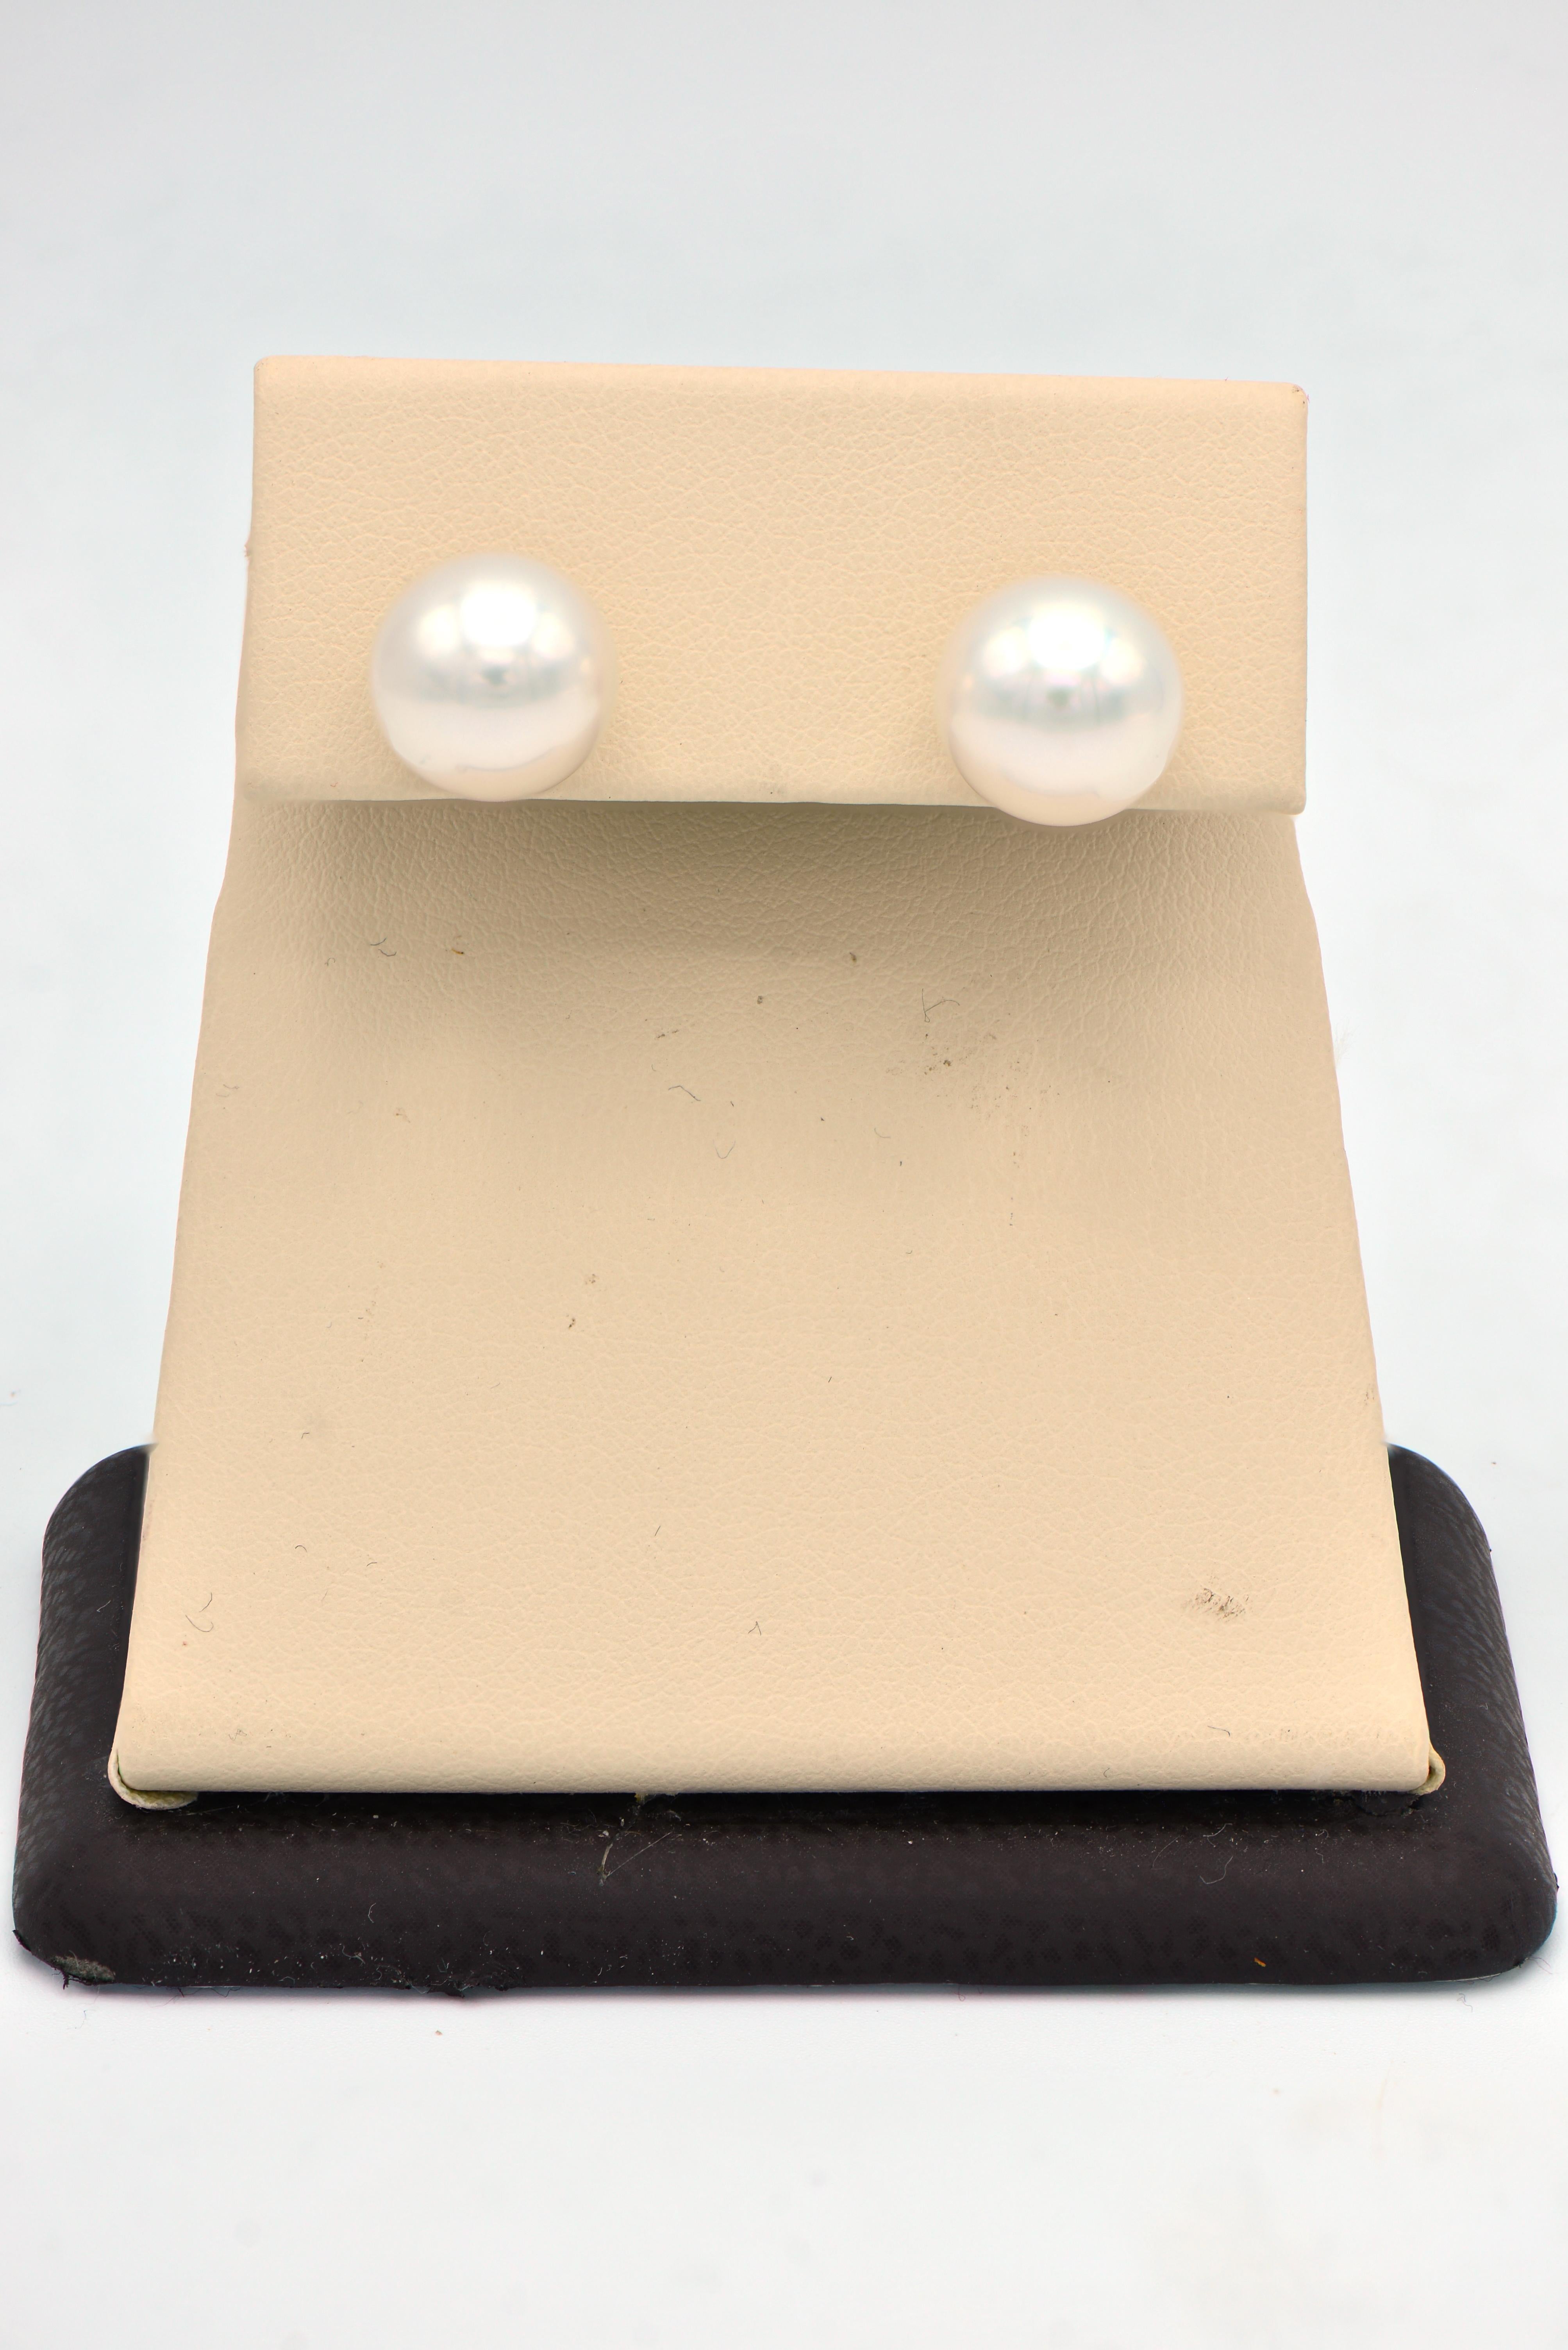 Round Cut Freshwater Pearl Stud Earrings with 14 Karat White Gold Post and Backs For Sale